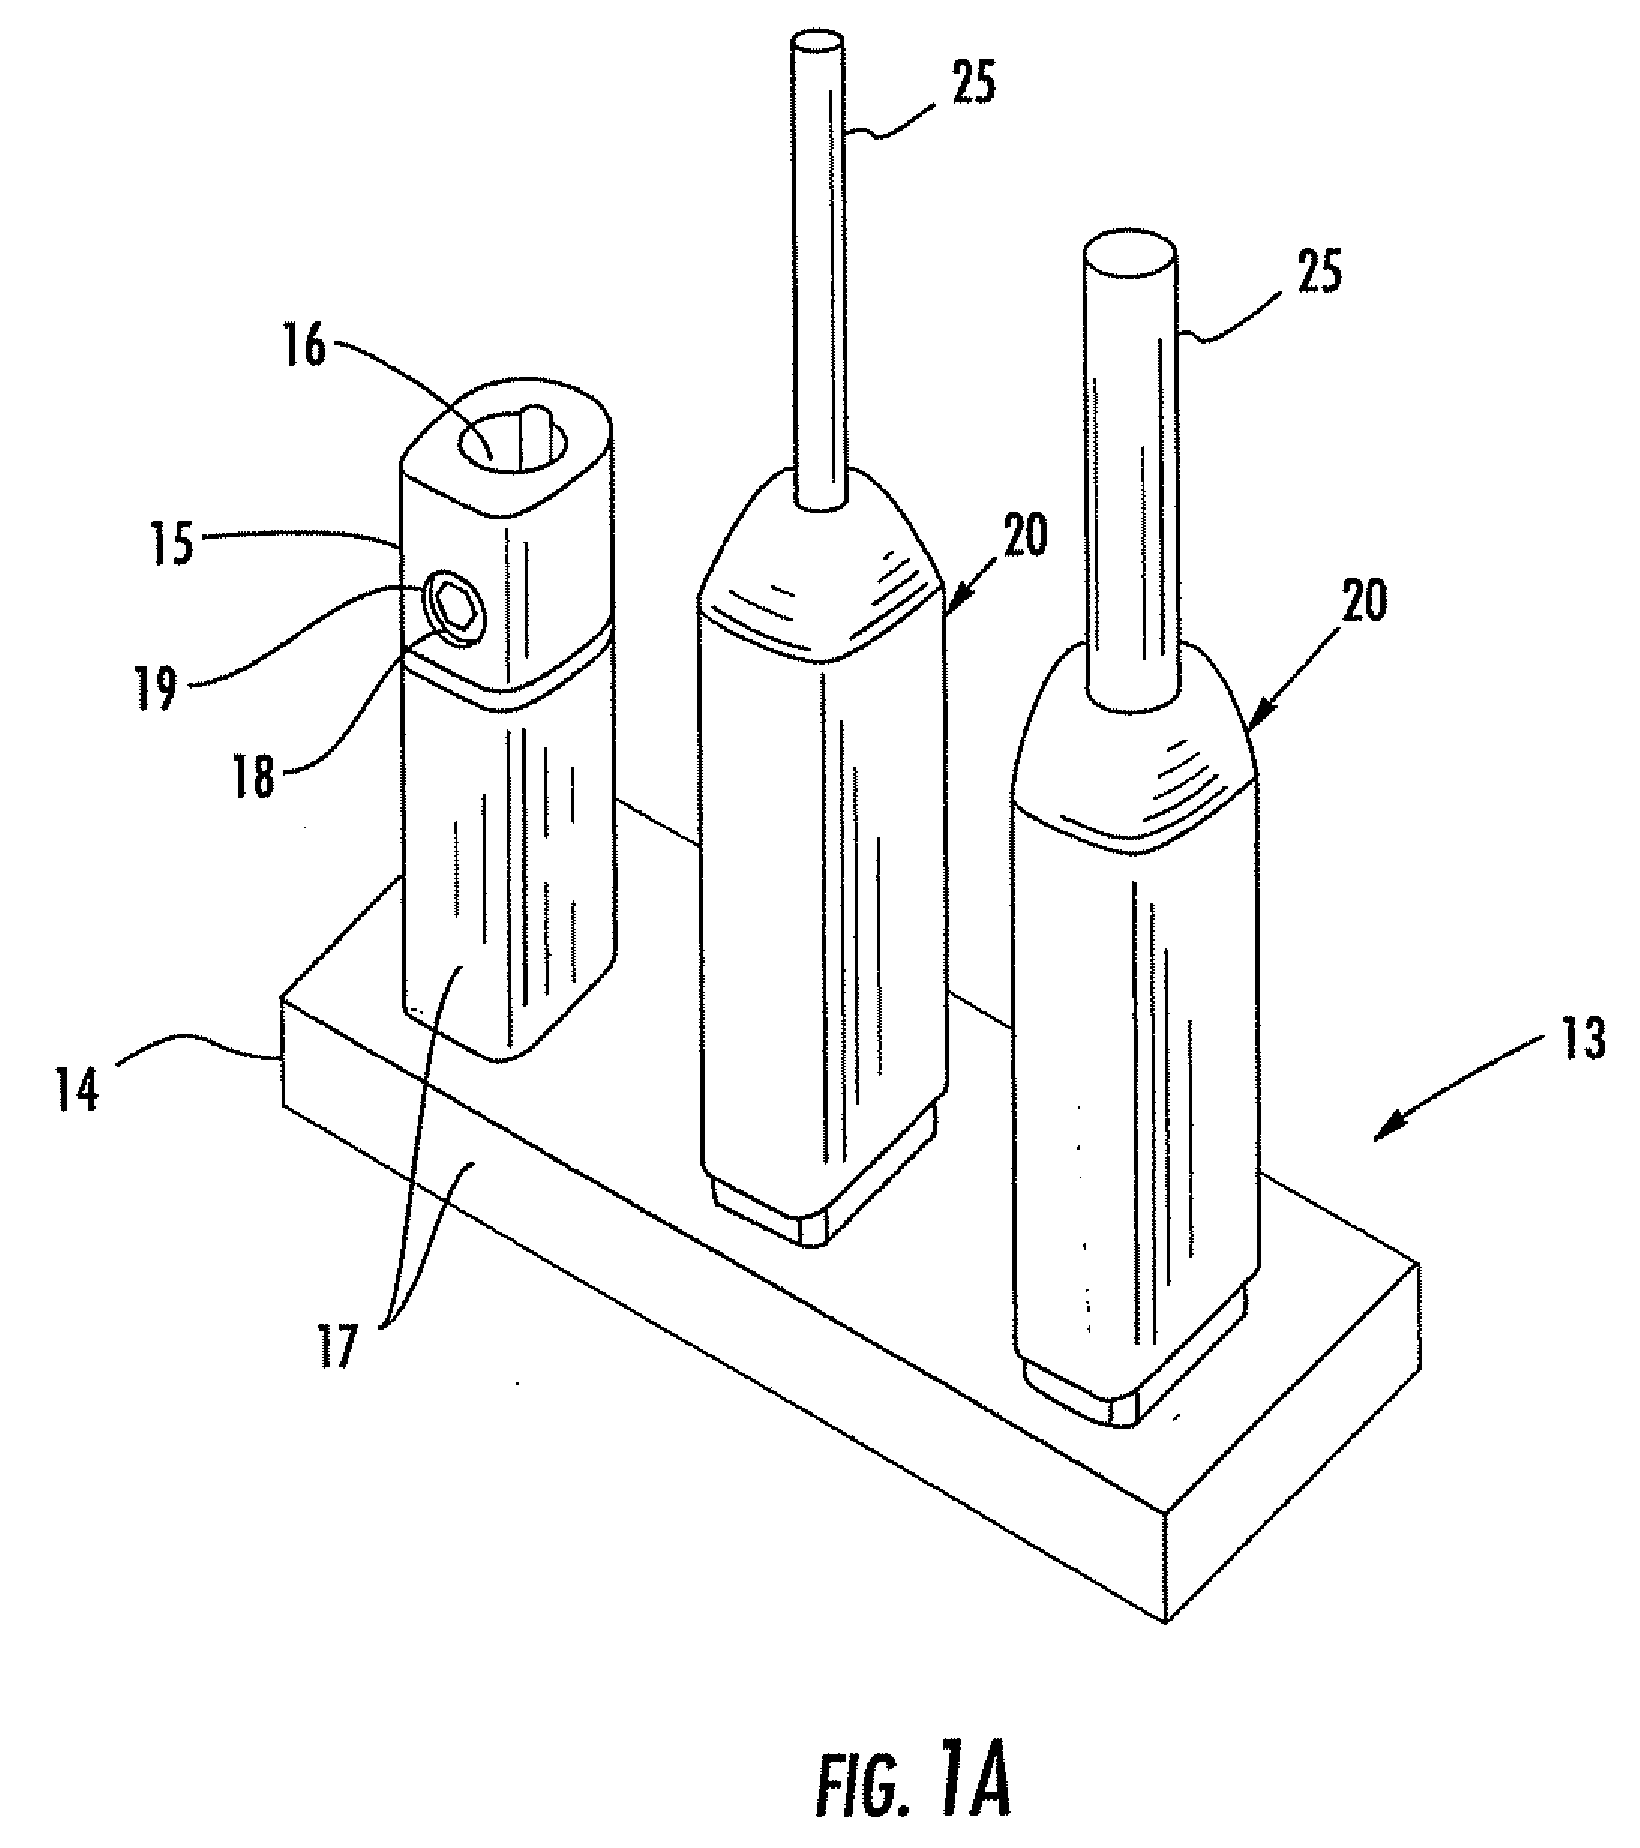 Connector insulating boot for different sized conductors and associated methods